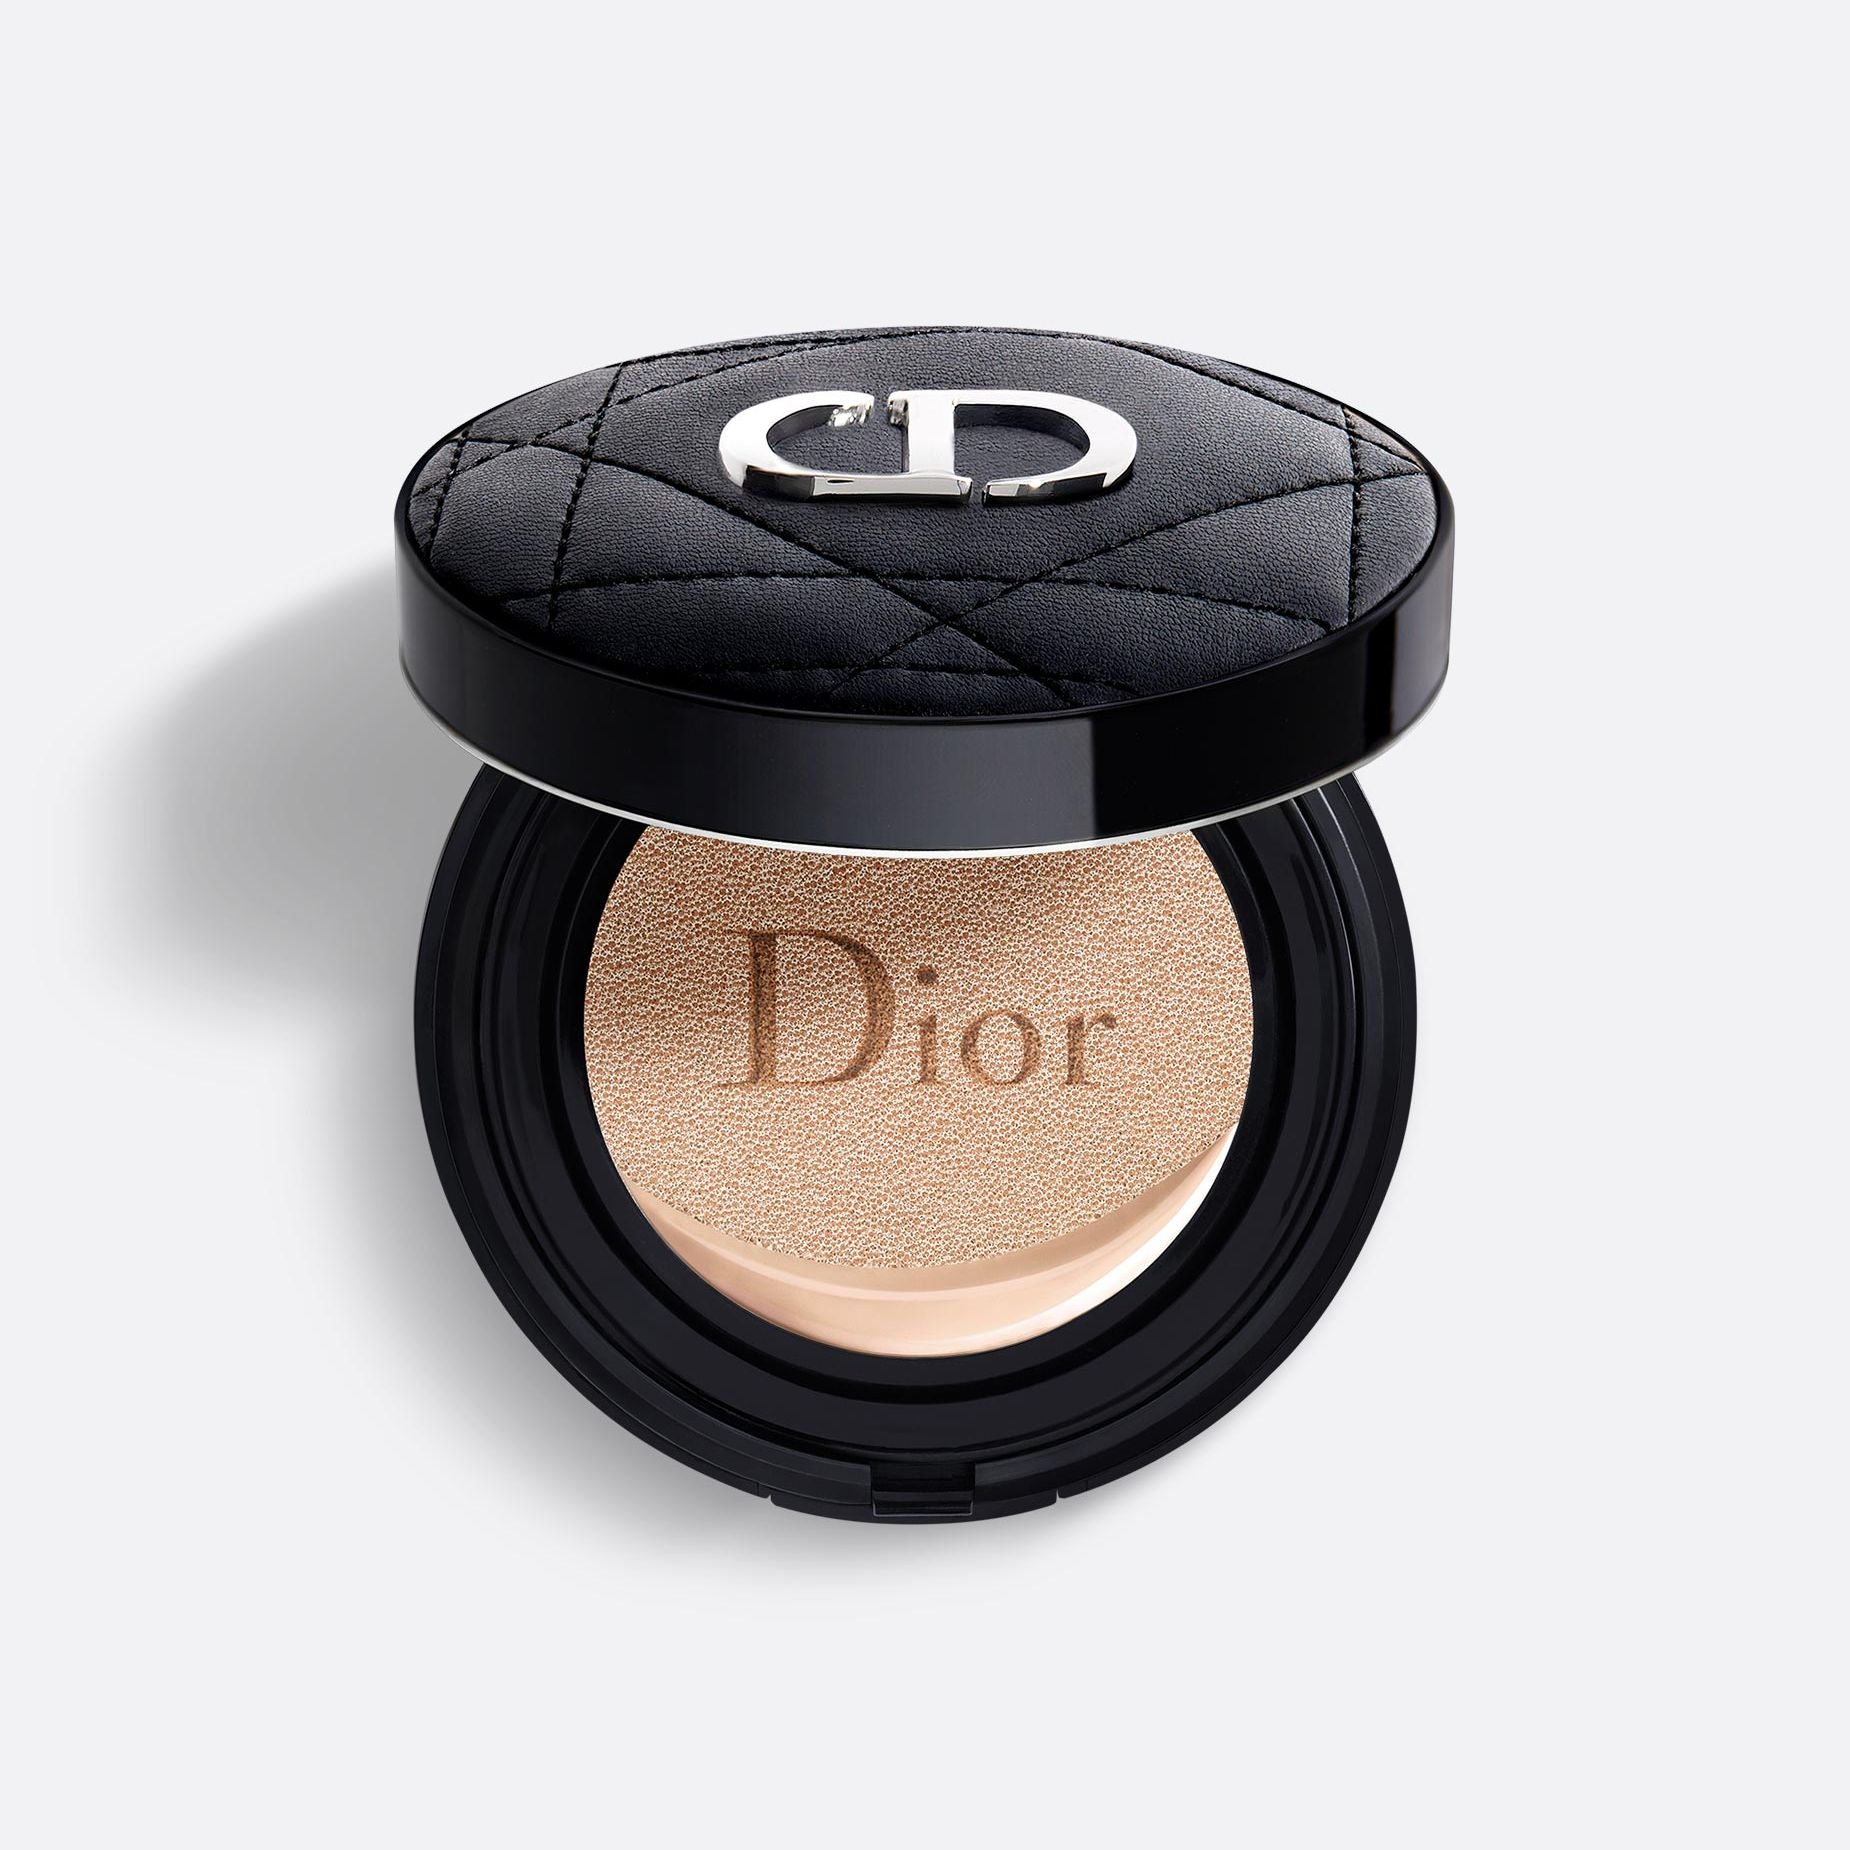 DIOR FOREVER COUTURE PERFECT CUSHION ~ 24H wear high perfection - luminous matte finish - Skin-caring fresh foundation - 24H hydration - SPF 35 - PA+++